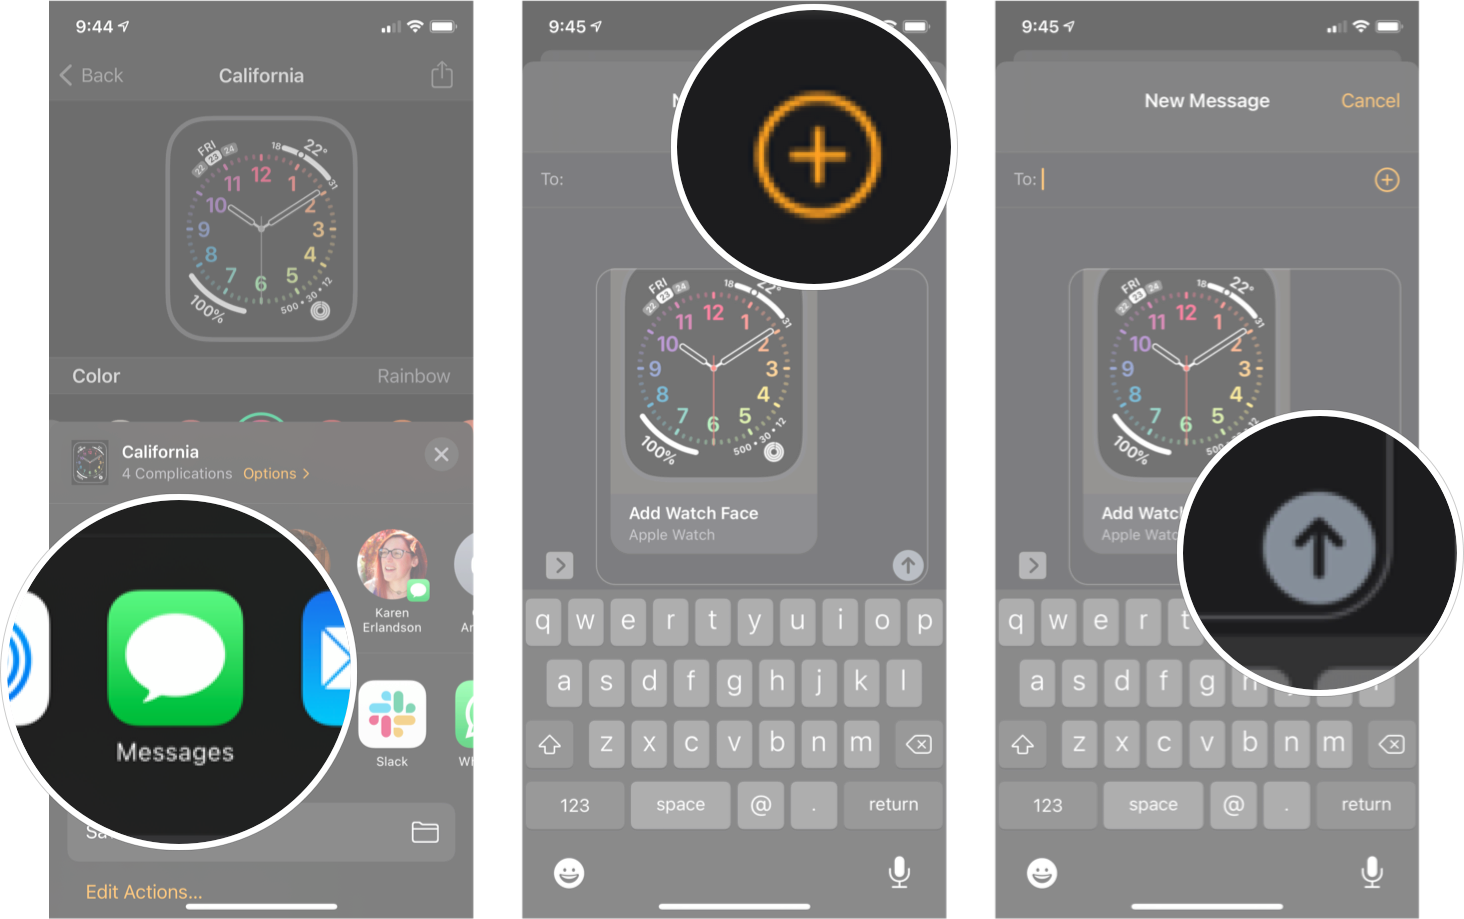 Share A Watch Face On IPhone: Tap the sharing method you want to use, fine the contact you want, and then tap send.